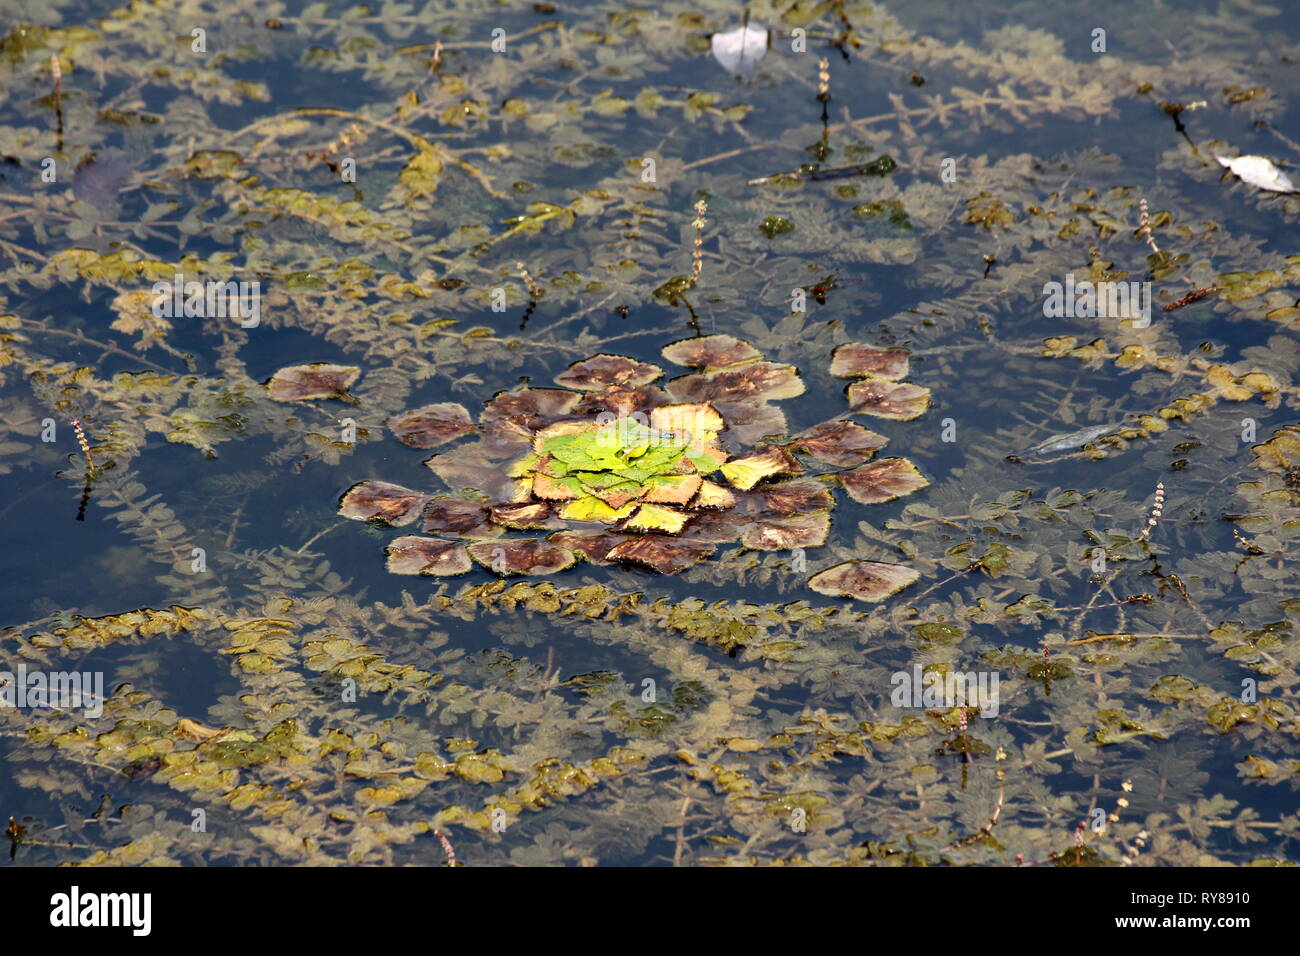 Water chestnut or Eleocharis dulcis or Chinese water chestnut grass like aquatic vegetable sedge with thick green and brown leaves floating Stock Photo